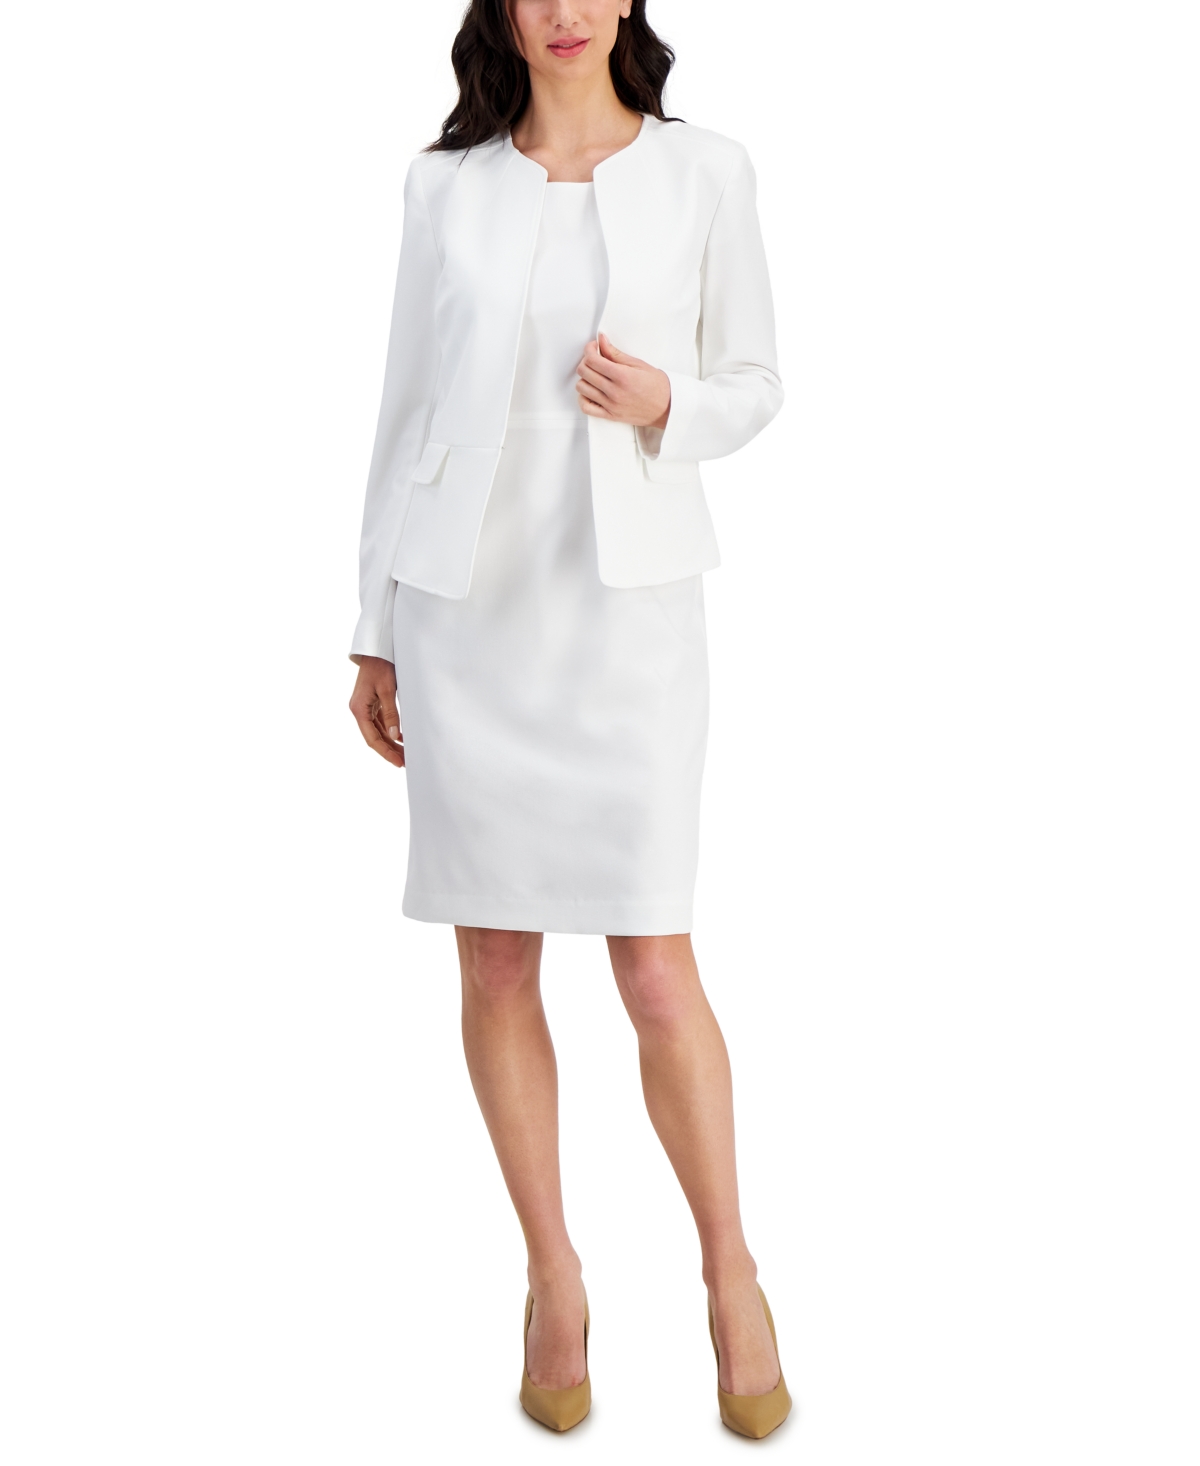 Le Suit Collarless Dress Suit, Regular & Petite Sizes In Natural White